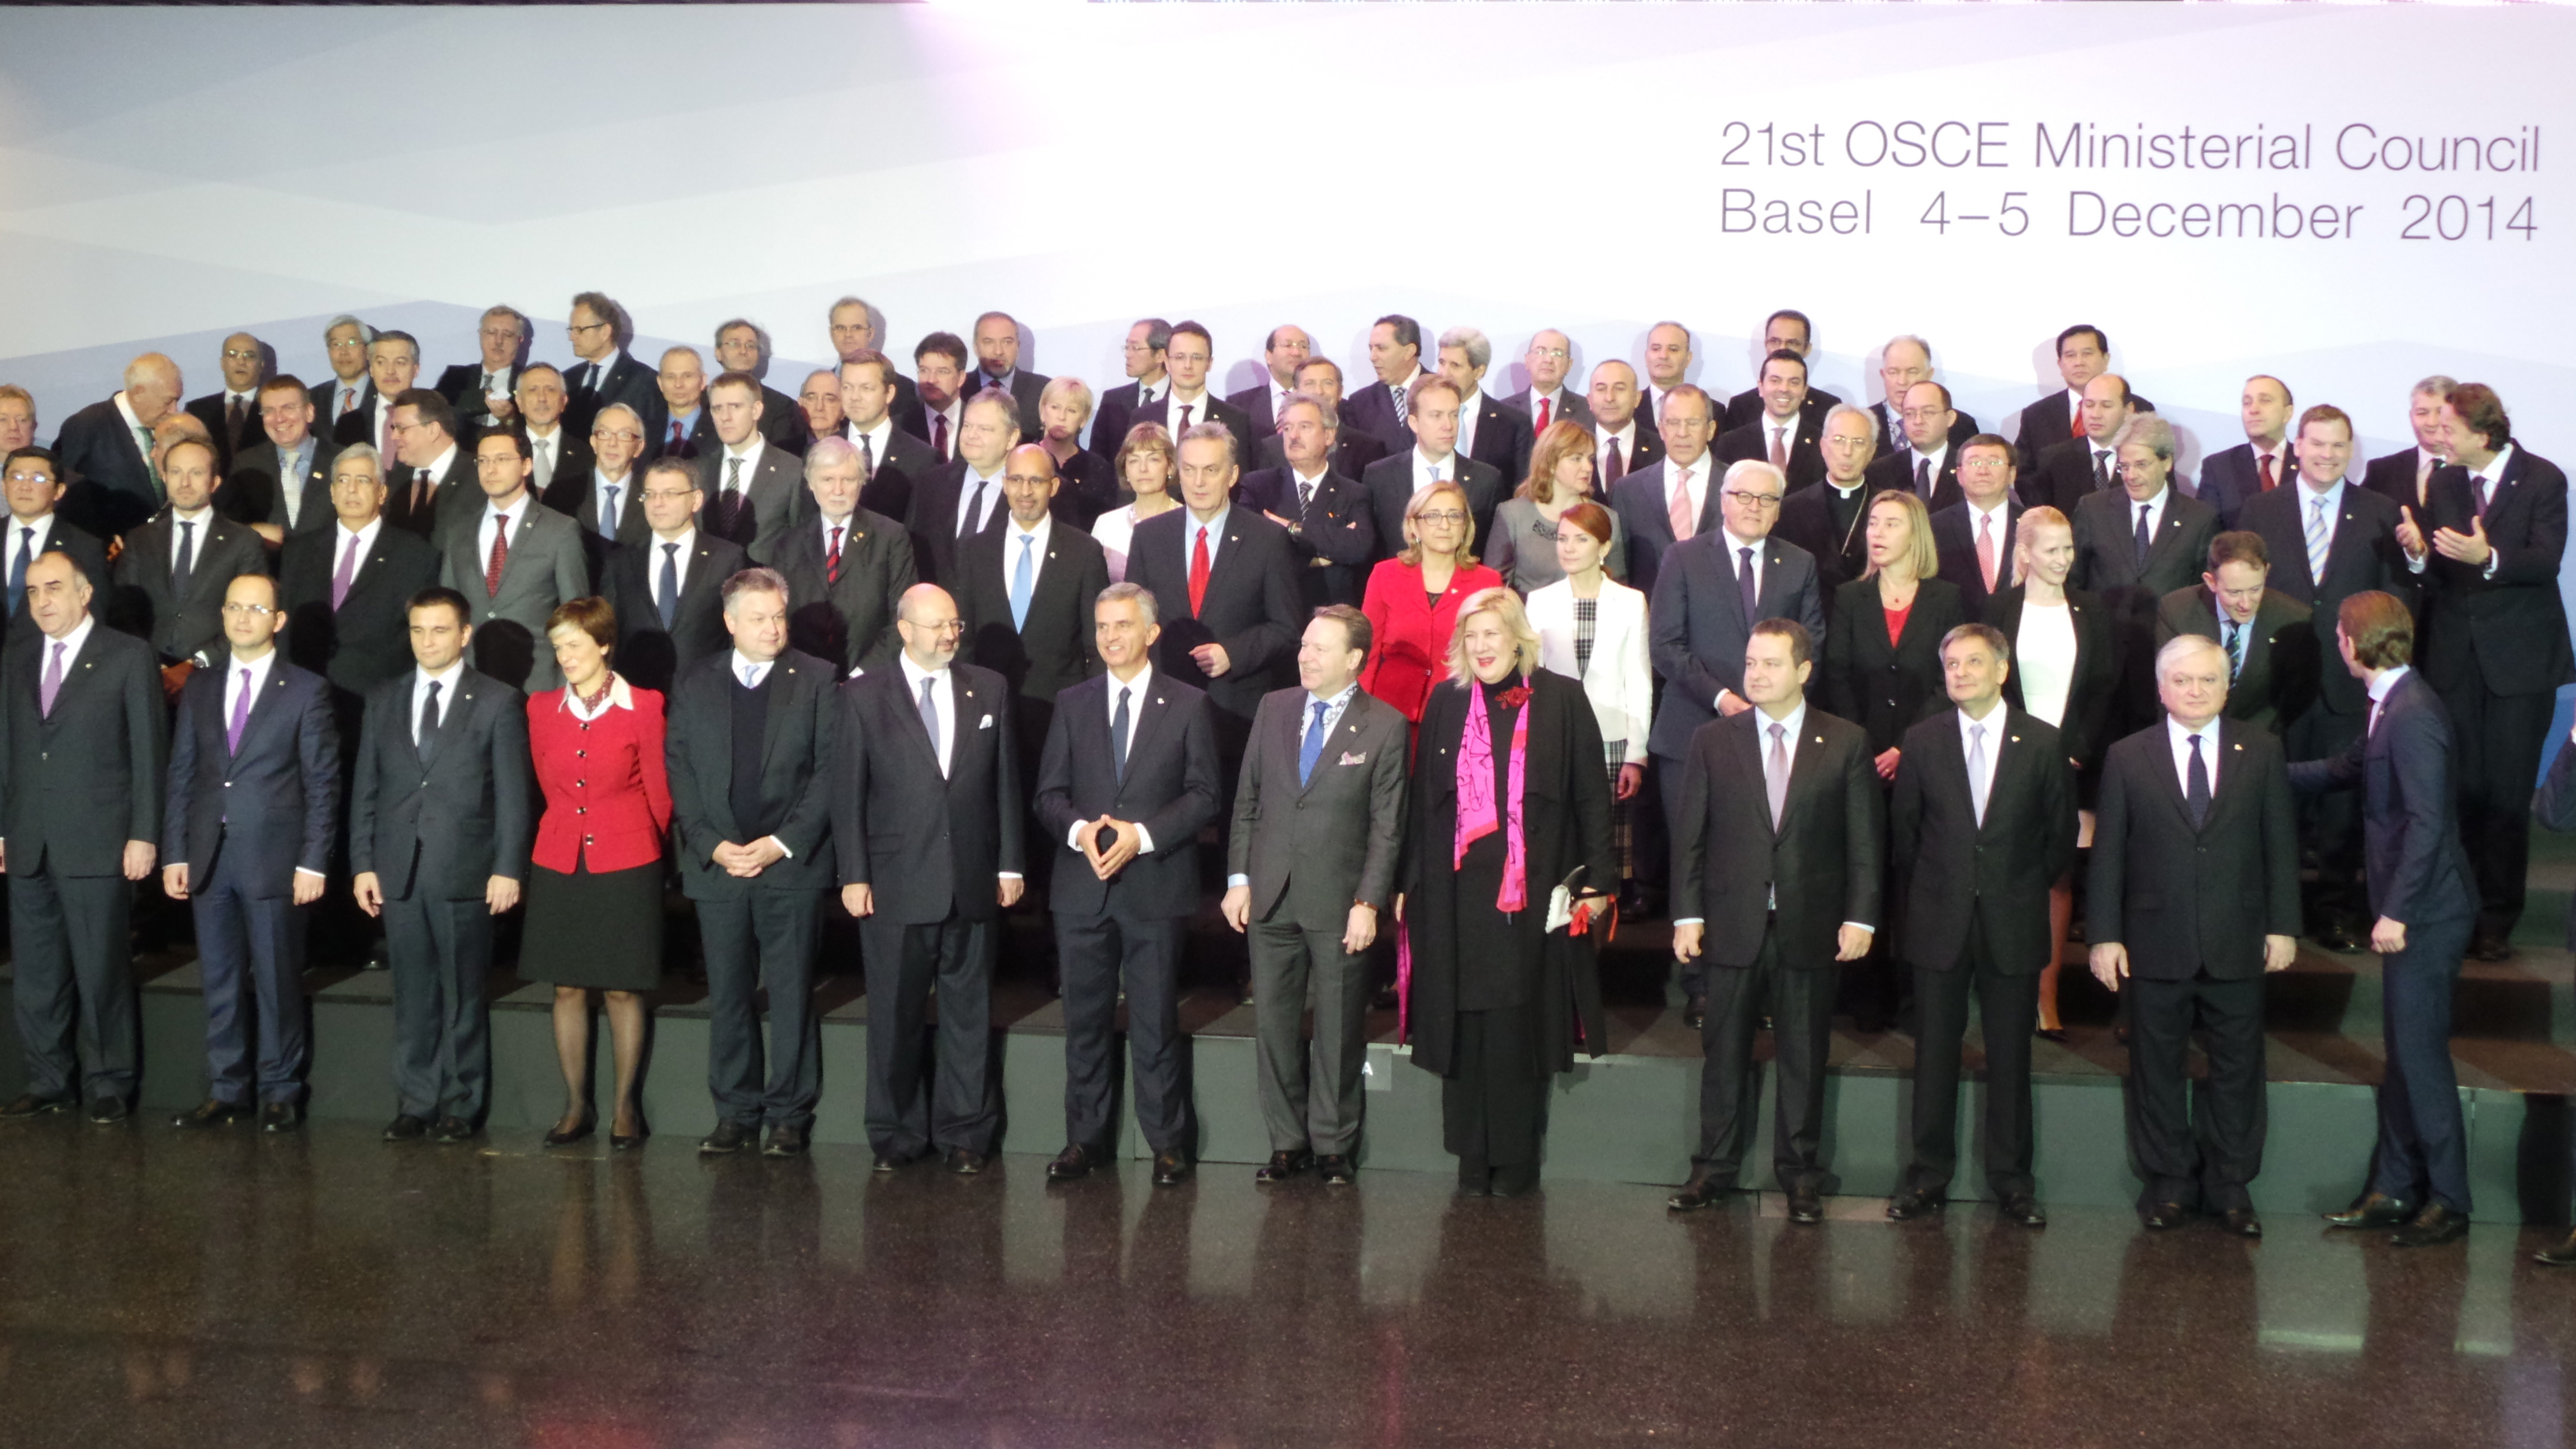 Group picture of the foreign ministers taking part in the 2014 Ministerial Council meeting in Basel